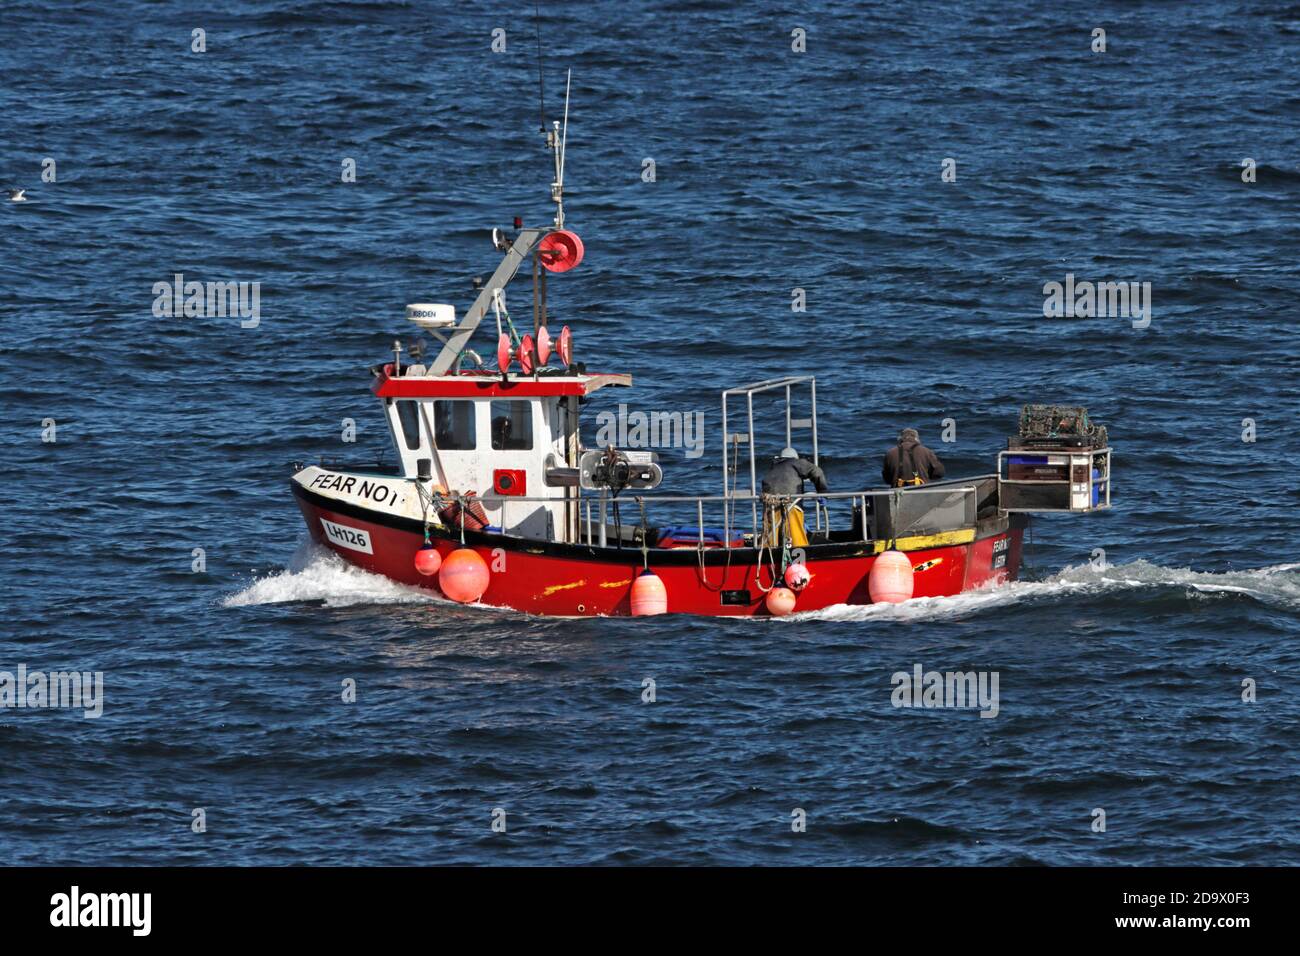 Lobster fishing boat carrying lobster pots or creels, Scotland, UK. Stock Photo